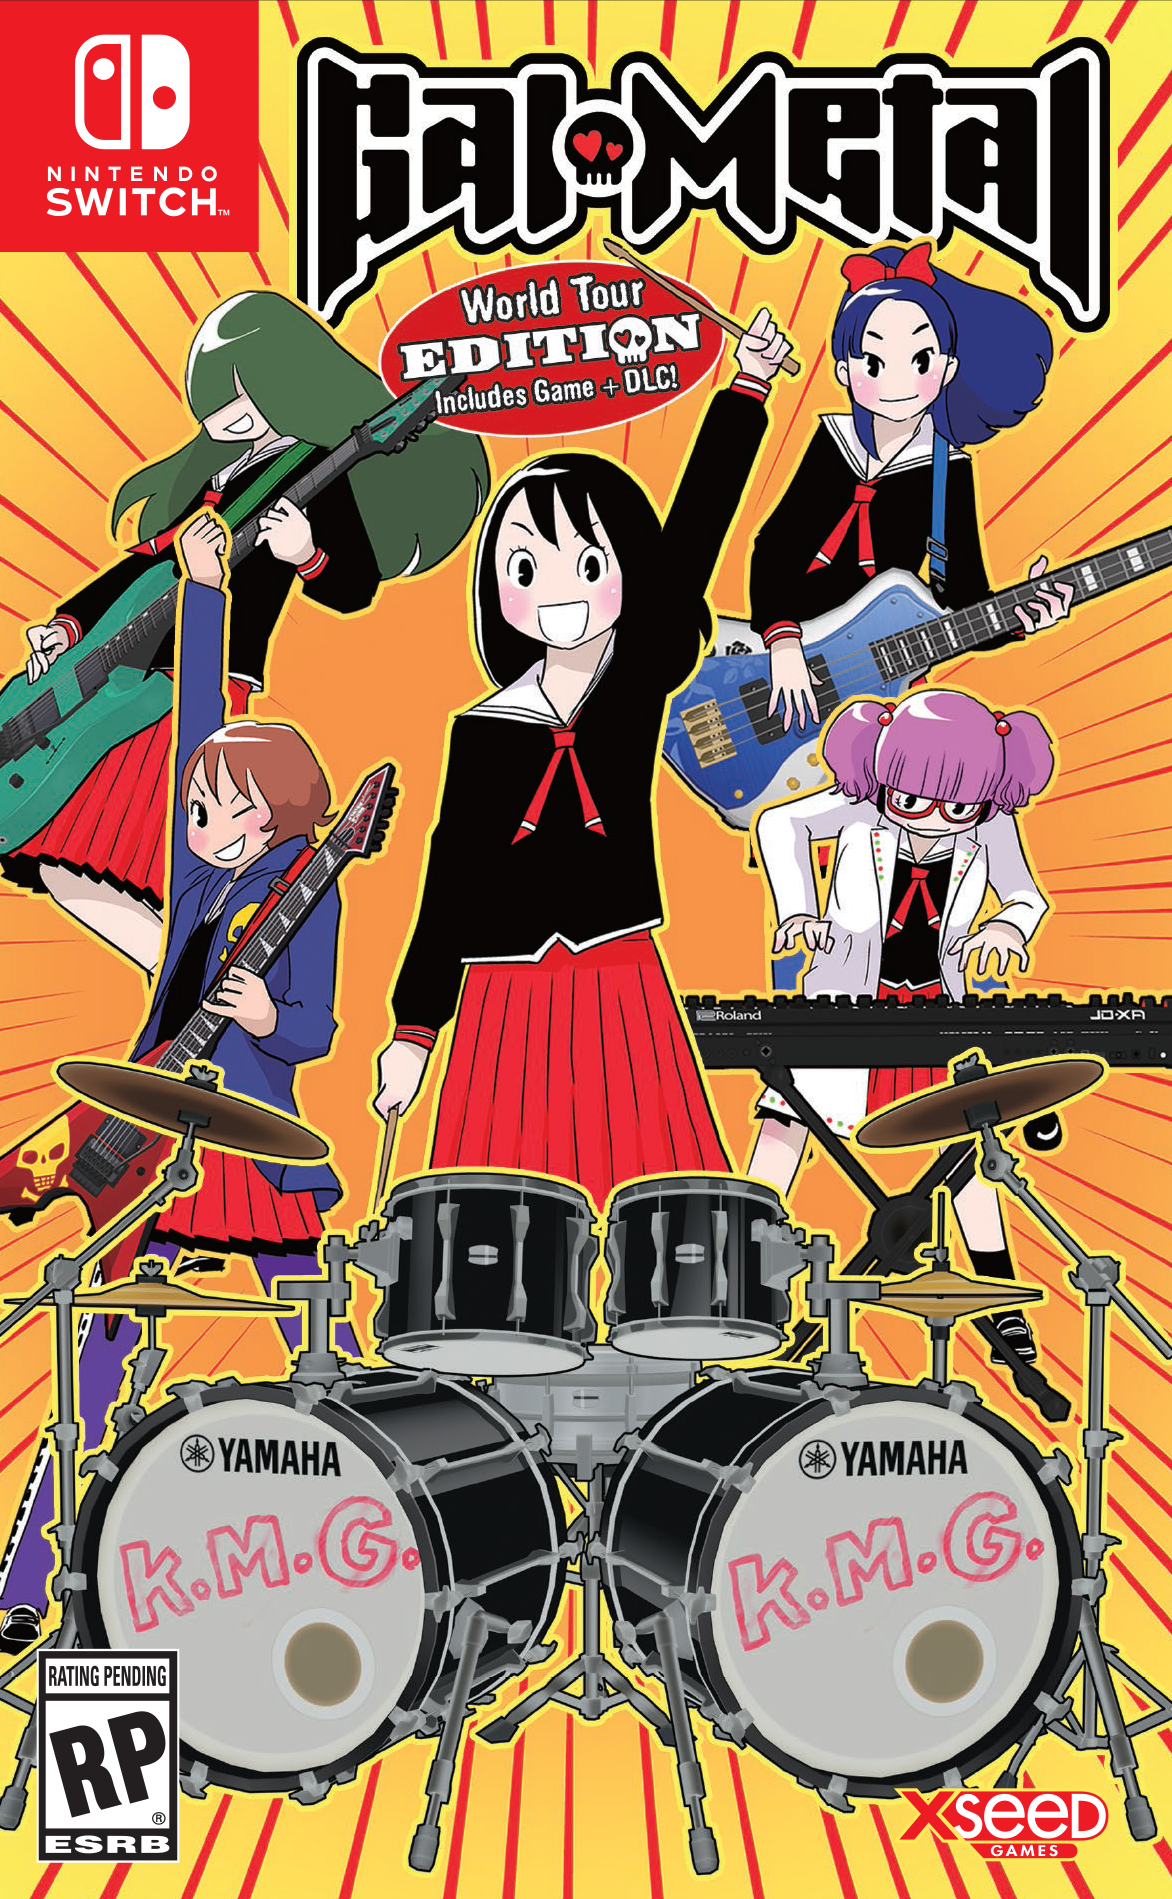 Gal Metal cover (XSEED Games/Marvelous USA)